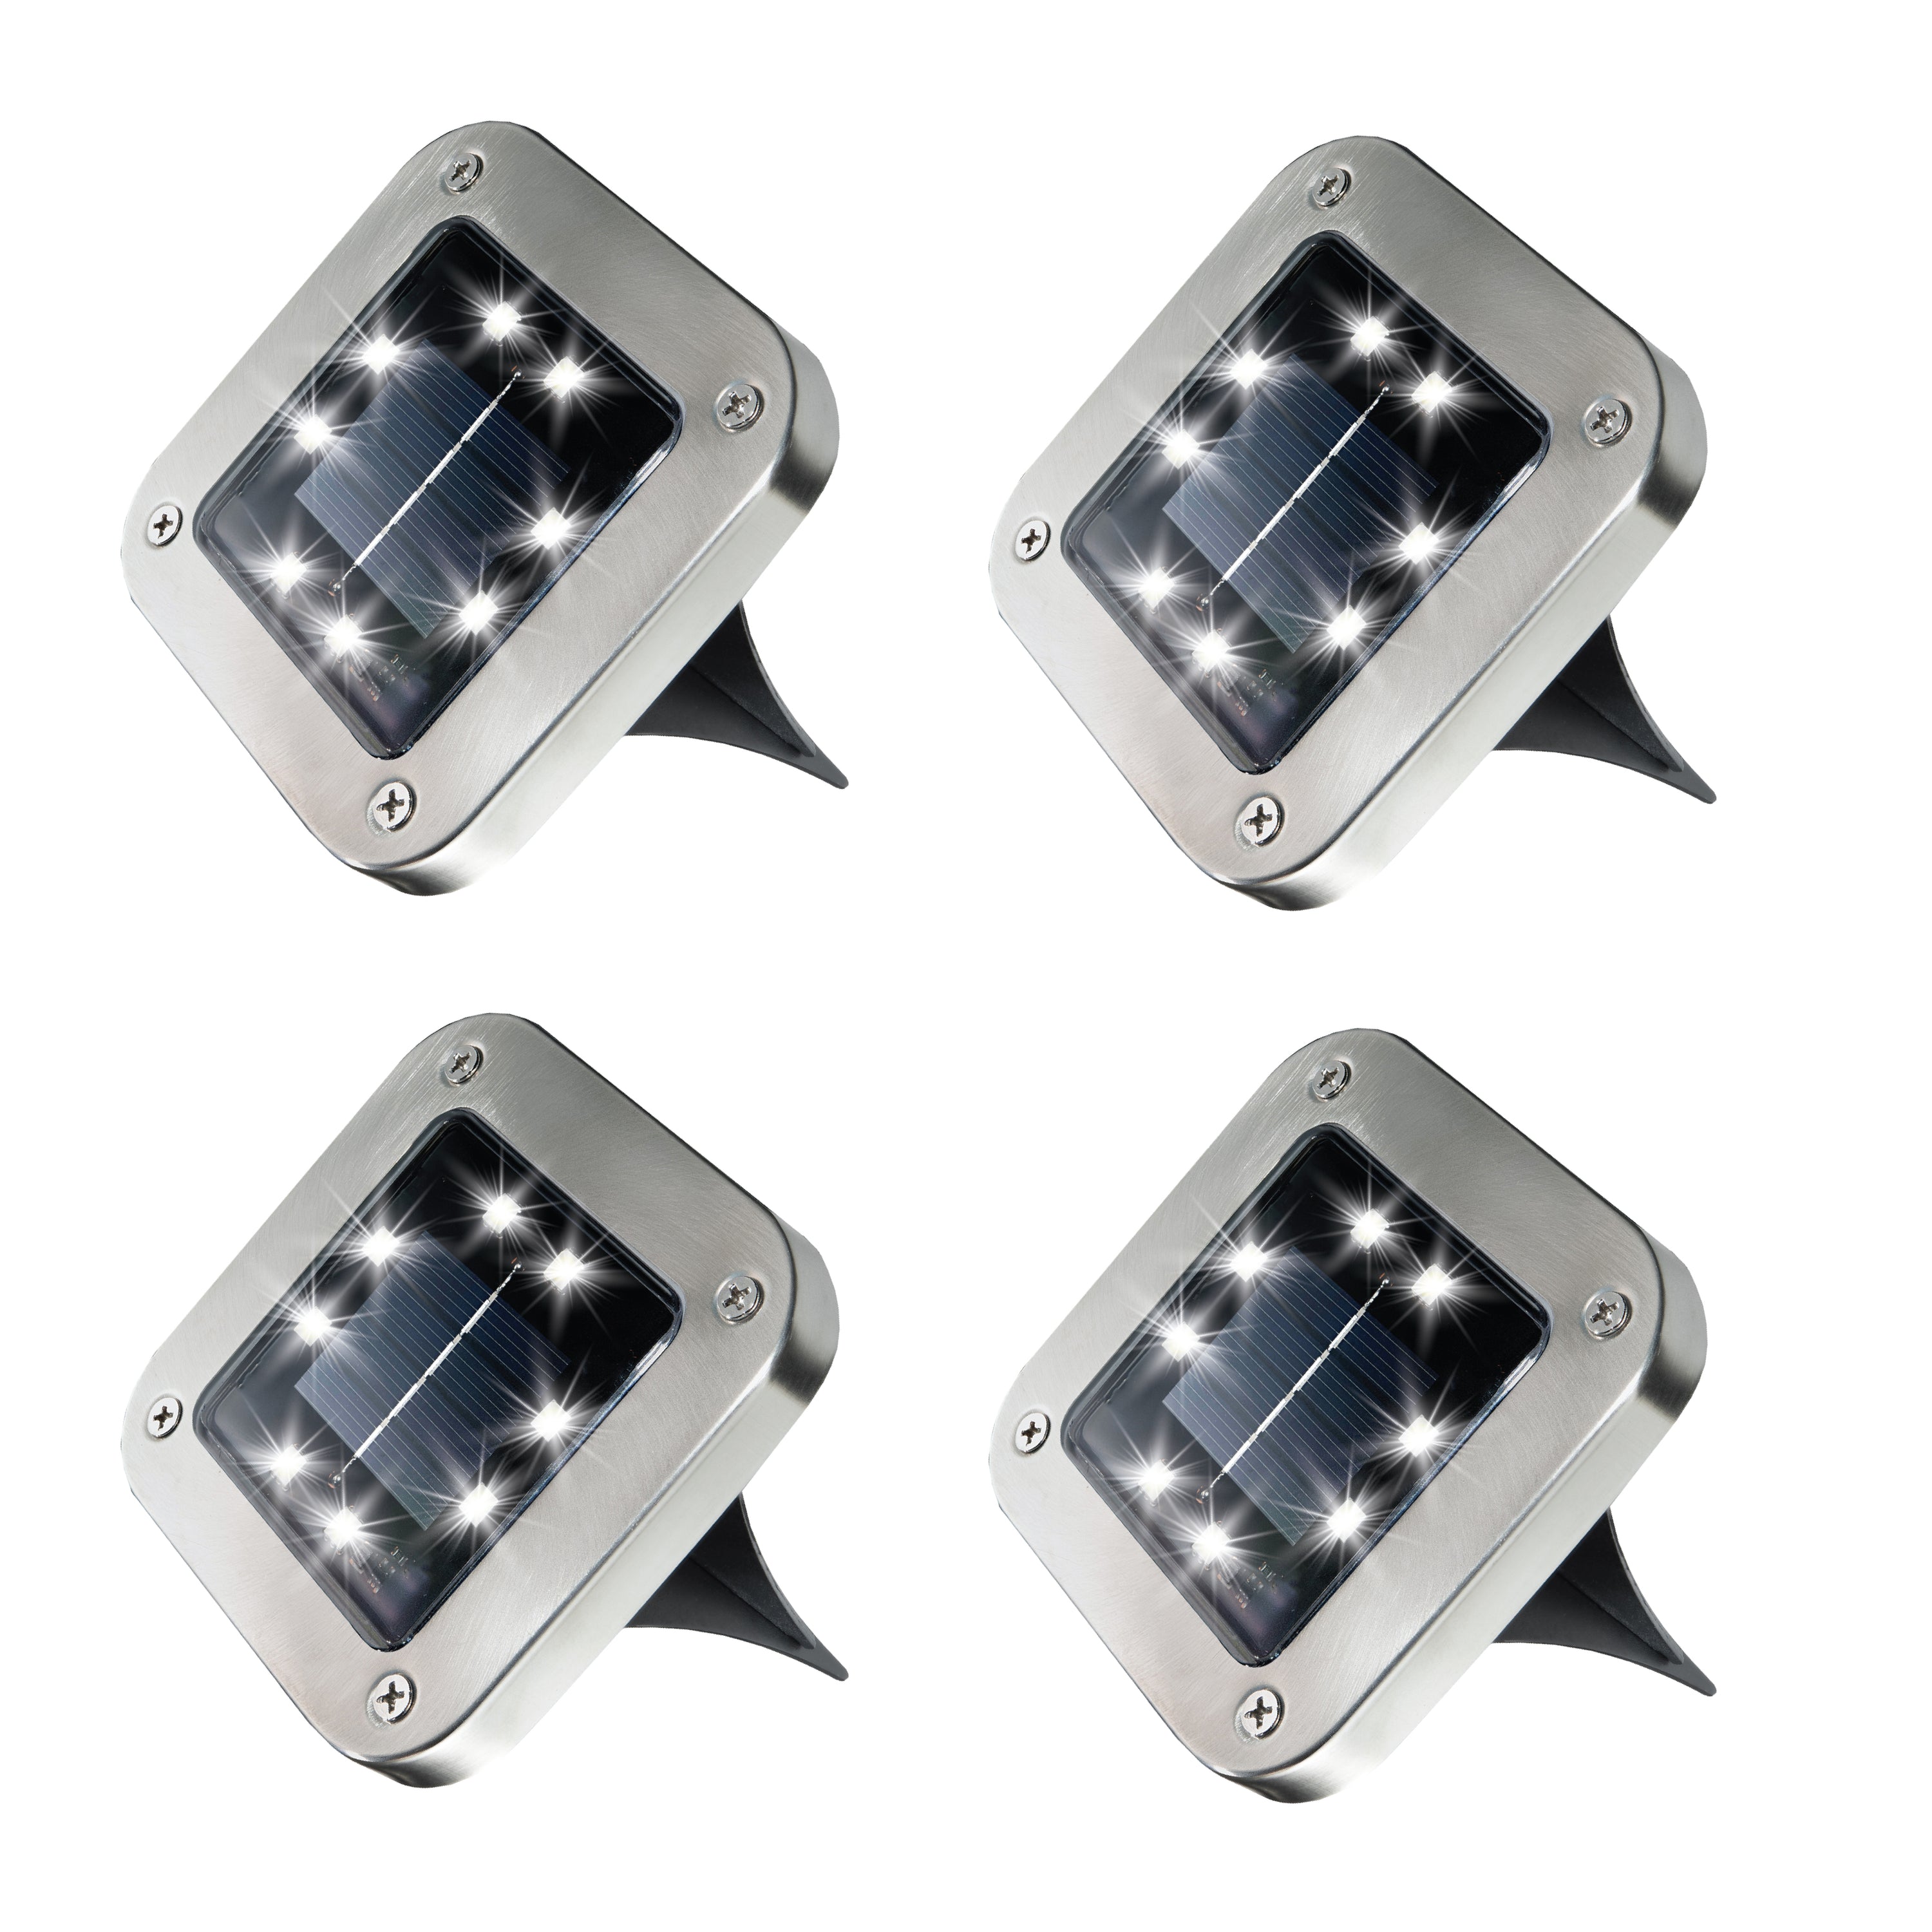 Bell + Howell Stainless Steel Pathway & Landscape Disk Light Square 4 Pack with 8 LED